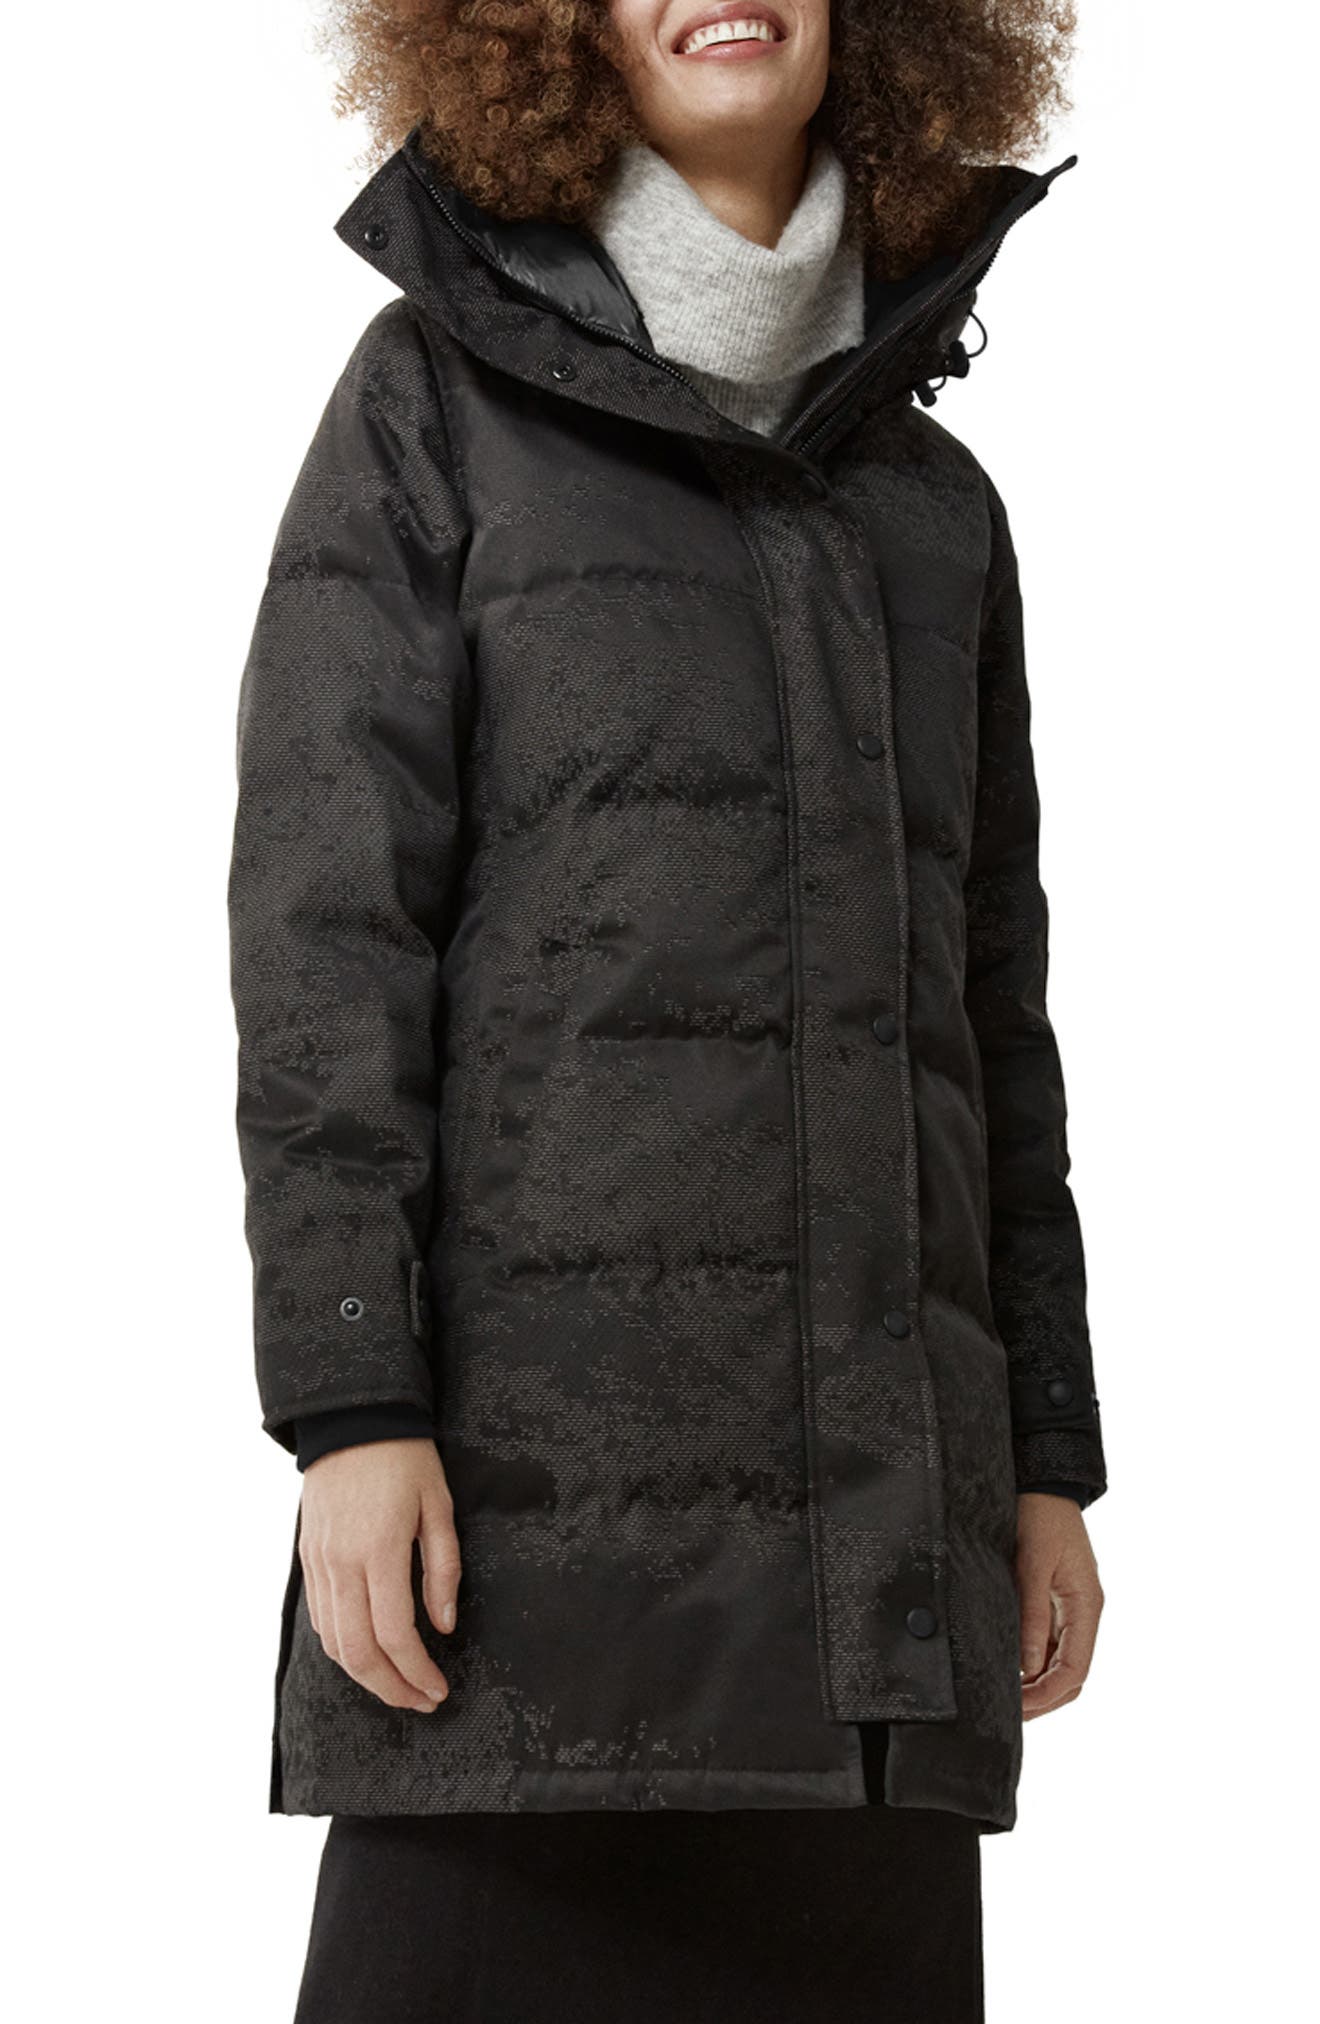 Canada Goose Shelburne Holiday Water Repellent 625 Fill Power Down Parka in Drftng Ice Blk Rfl at Nordstrom, Size Small